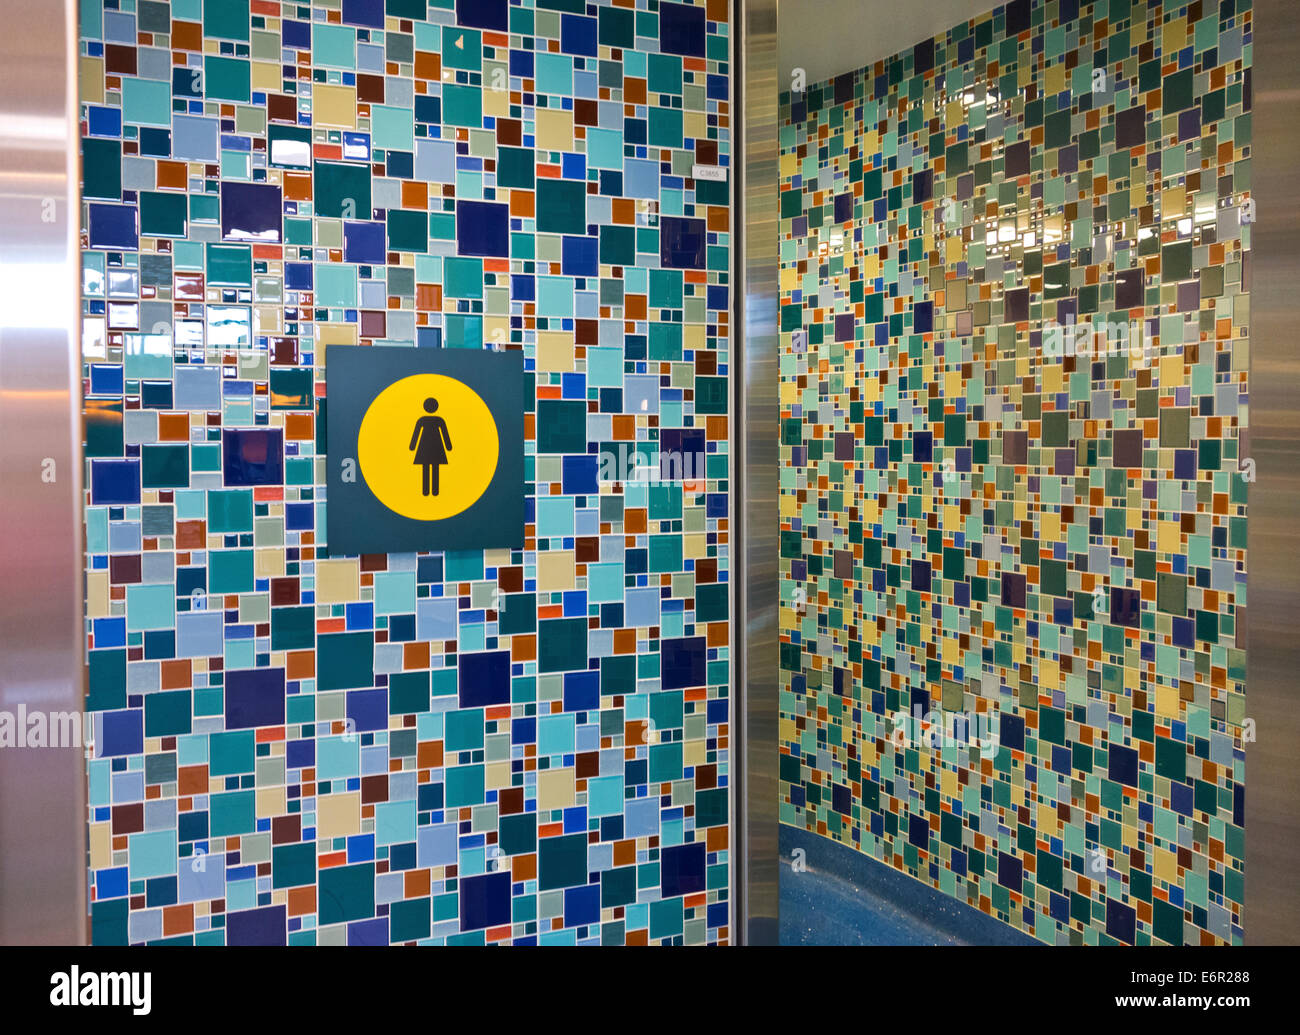 colorful-tile-mosaic-pattern-on-walls-of